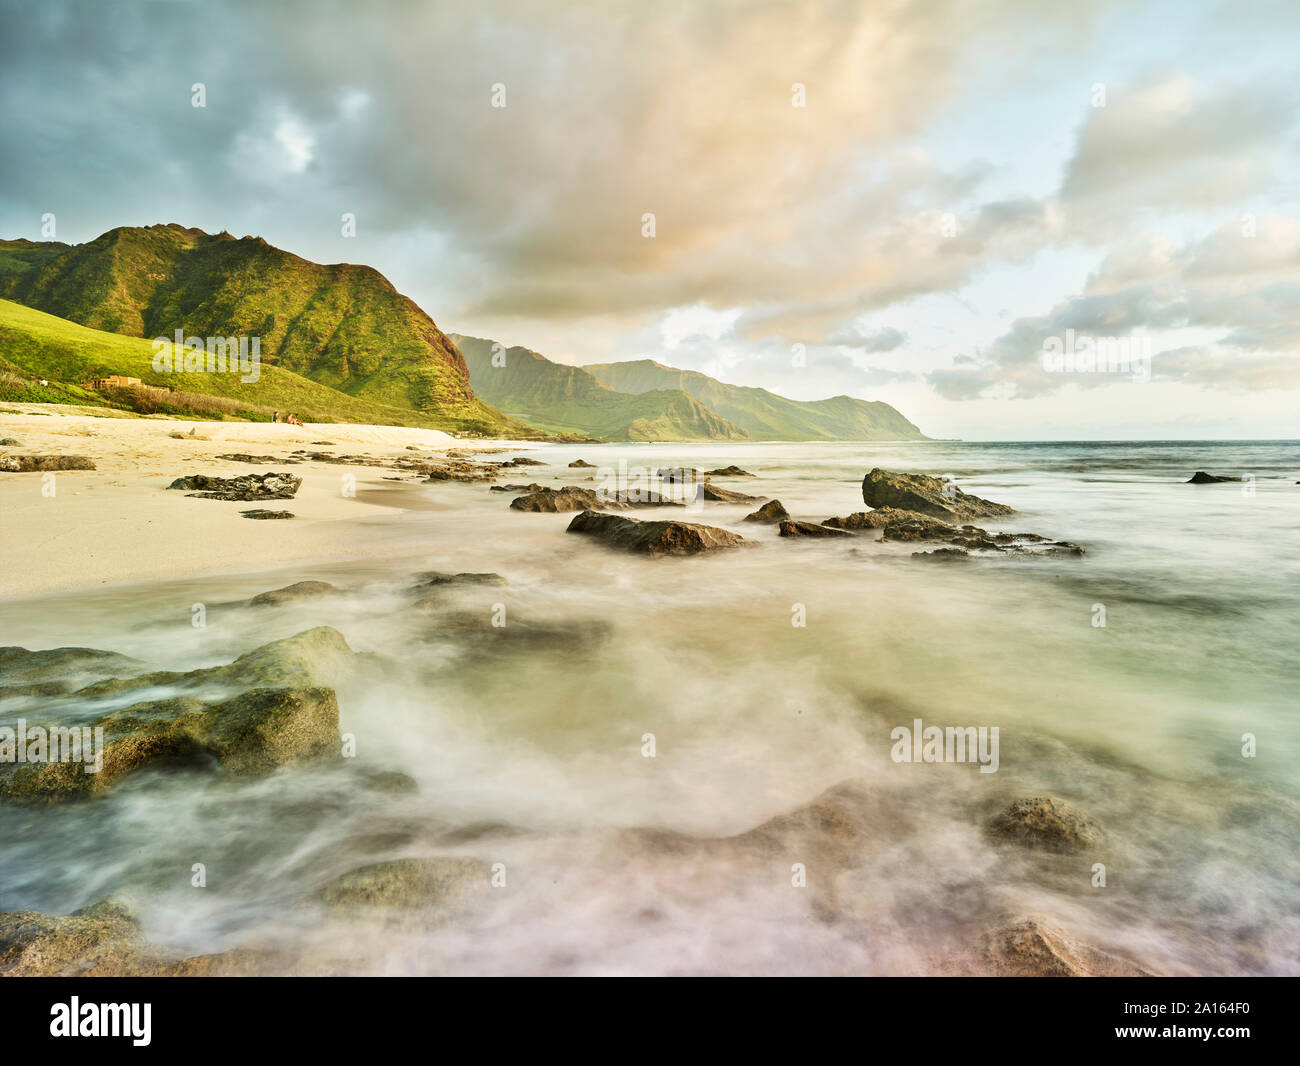 Scenic view of waves splashing on shore at beach in Ka'ena Point State Park against sky Stock Photo